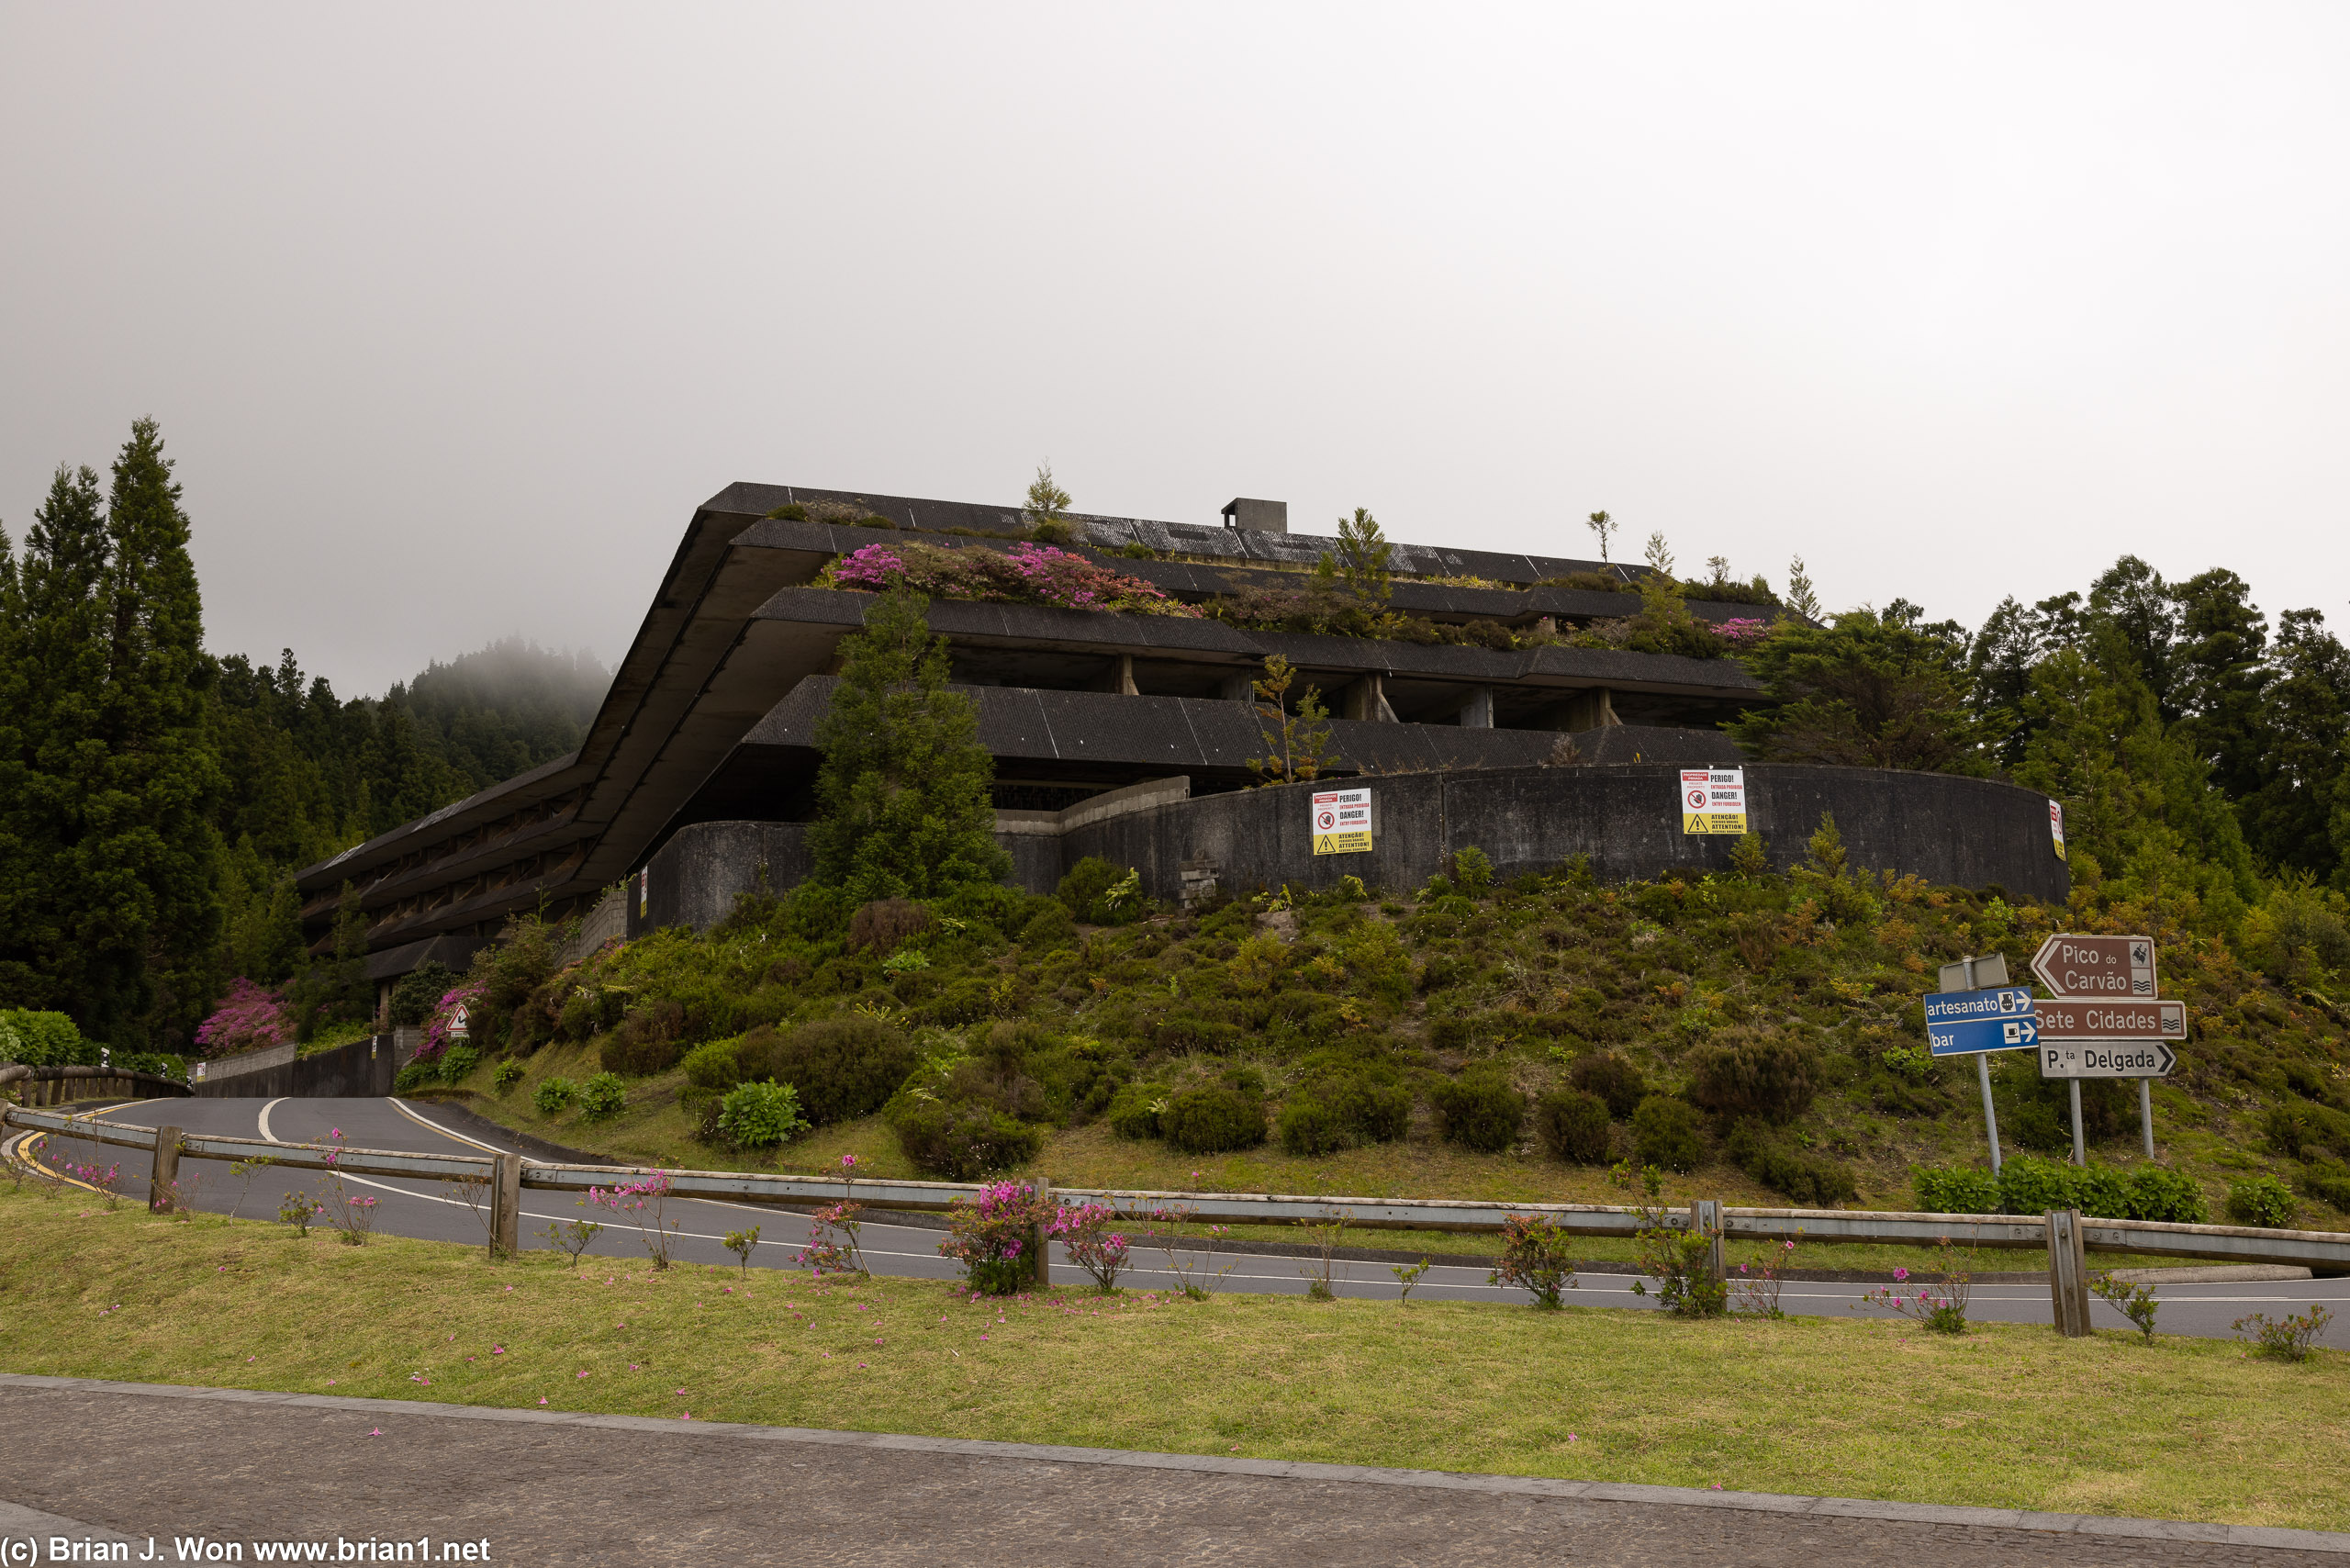 Not sure why everyone talks about this abandoned hotel.